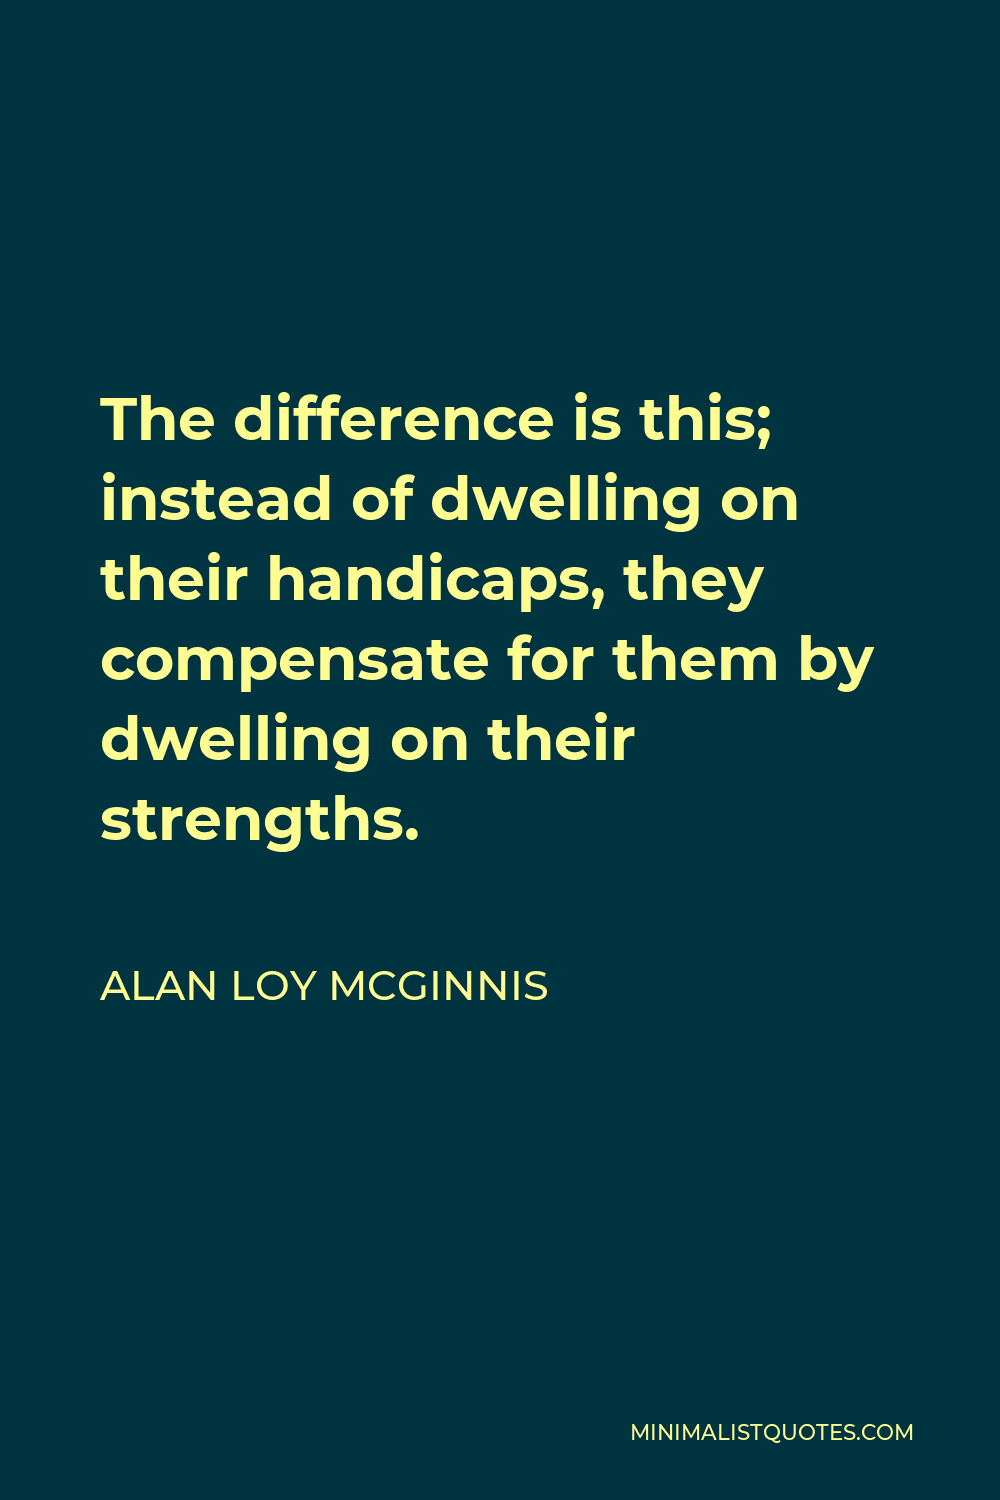 Alan Loy McGinnis Quote - The difference is this; instead of dwelling on their handicaps, they compensate for them by dwelling on their strengths.